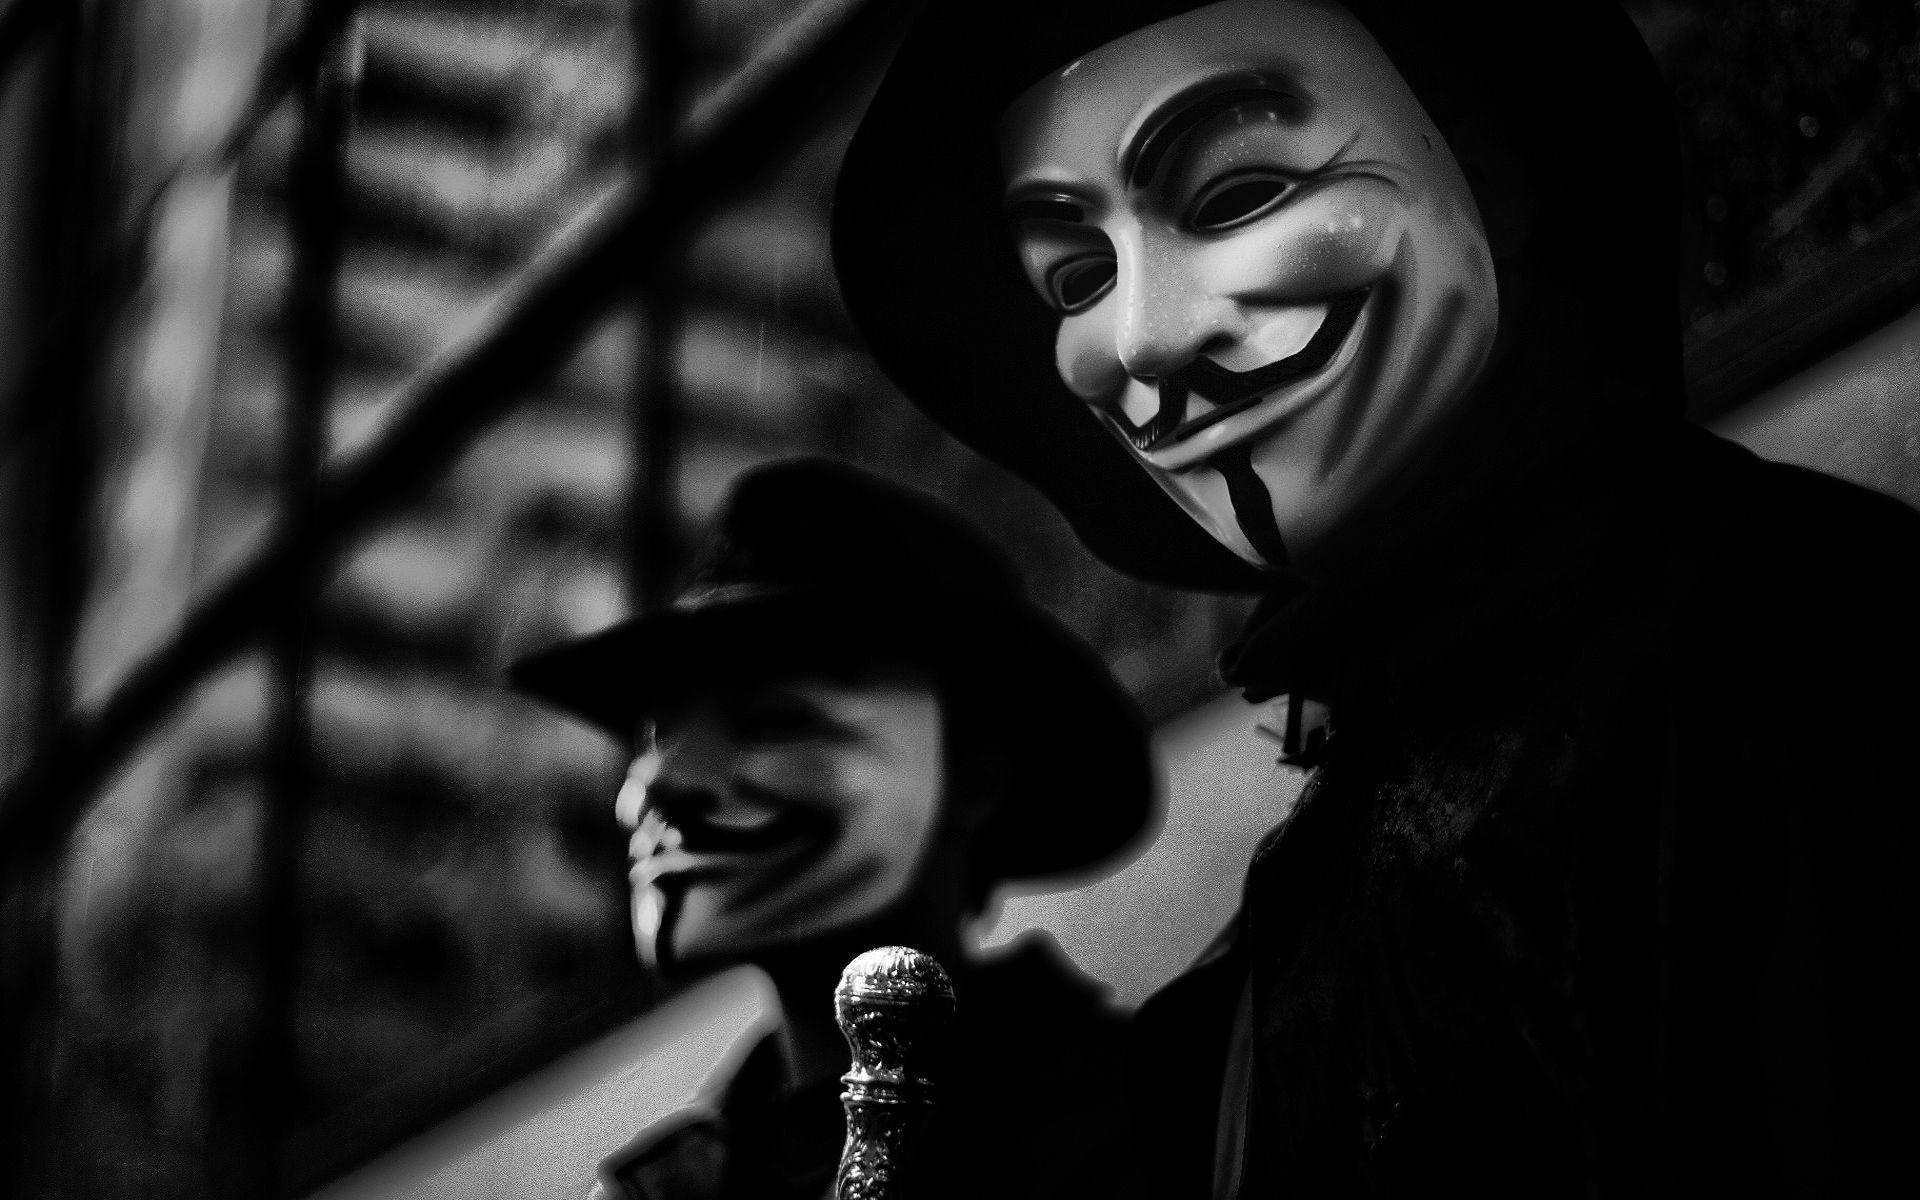 Anonymous desktop wallpaper in high quality